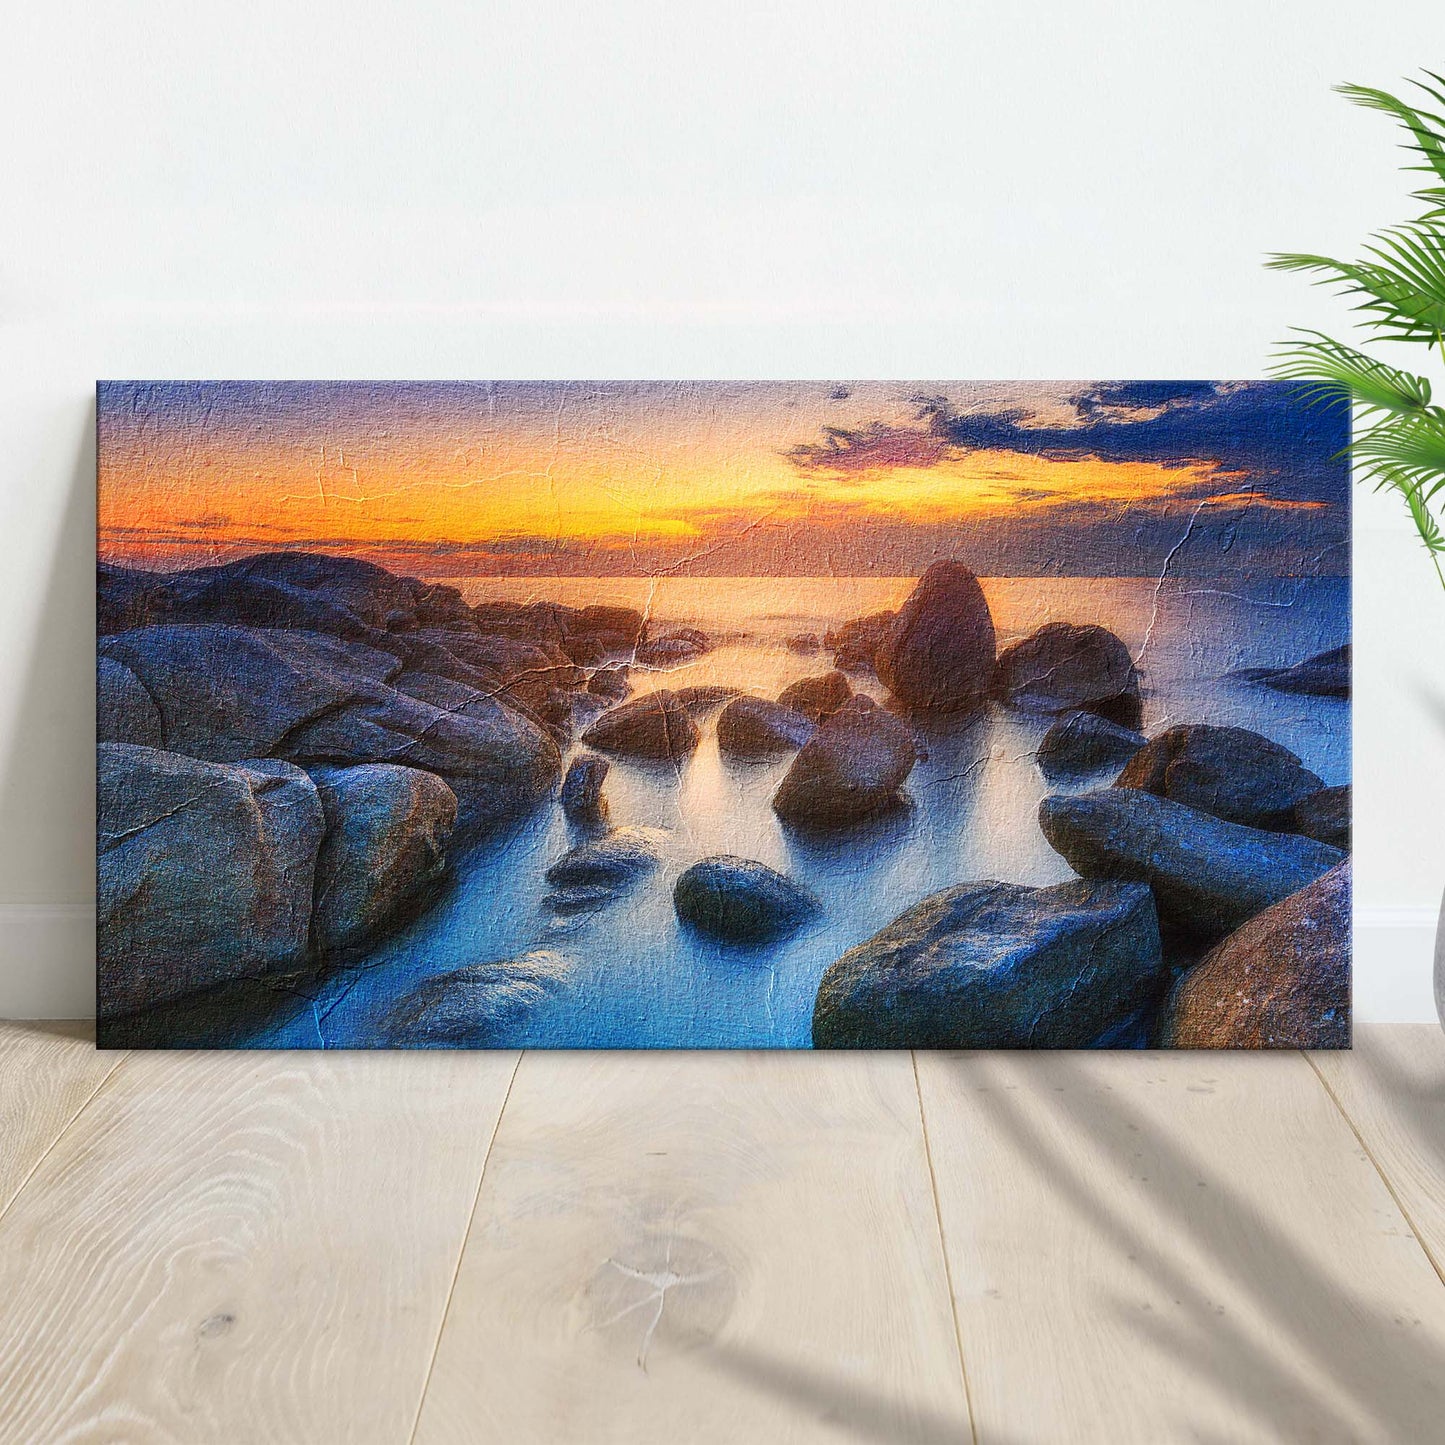 Seascape At Sunrise Canvas Wall Art - Image by Tailored Canvases